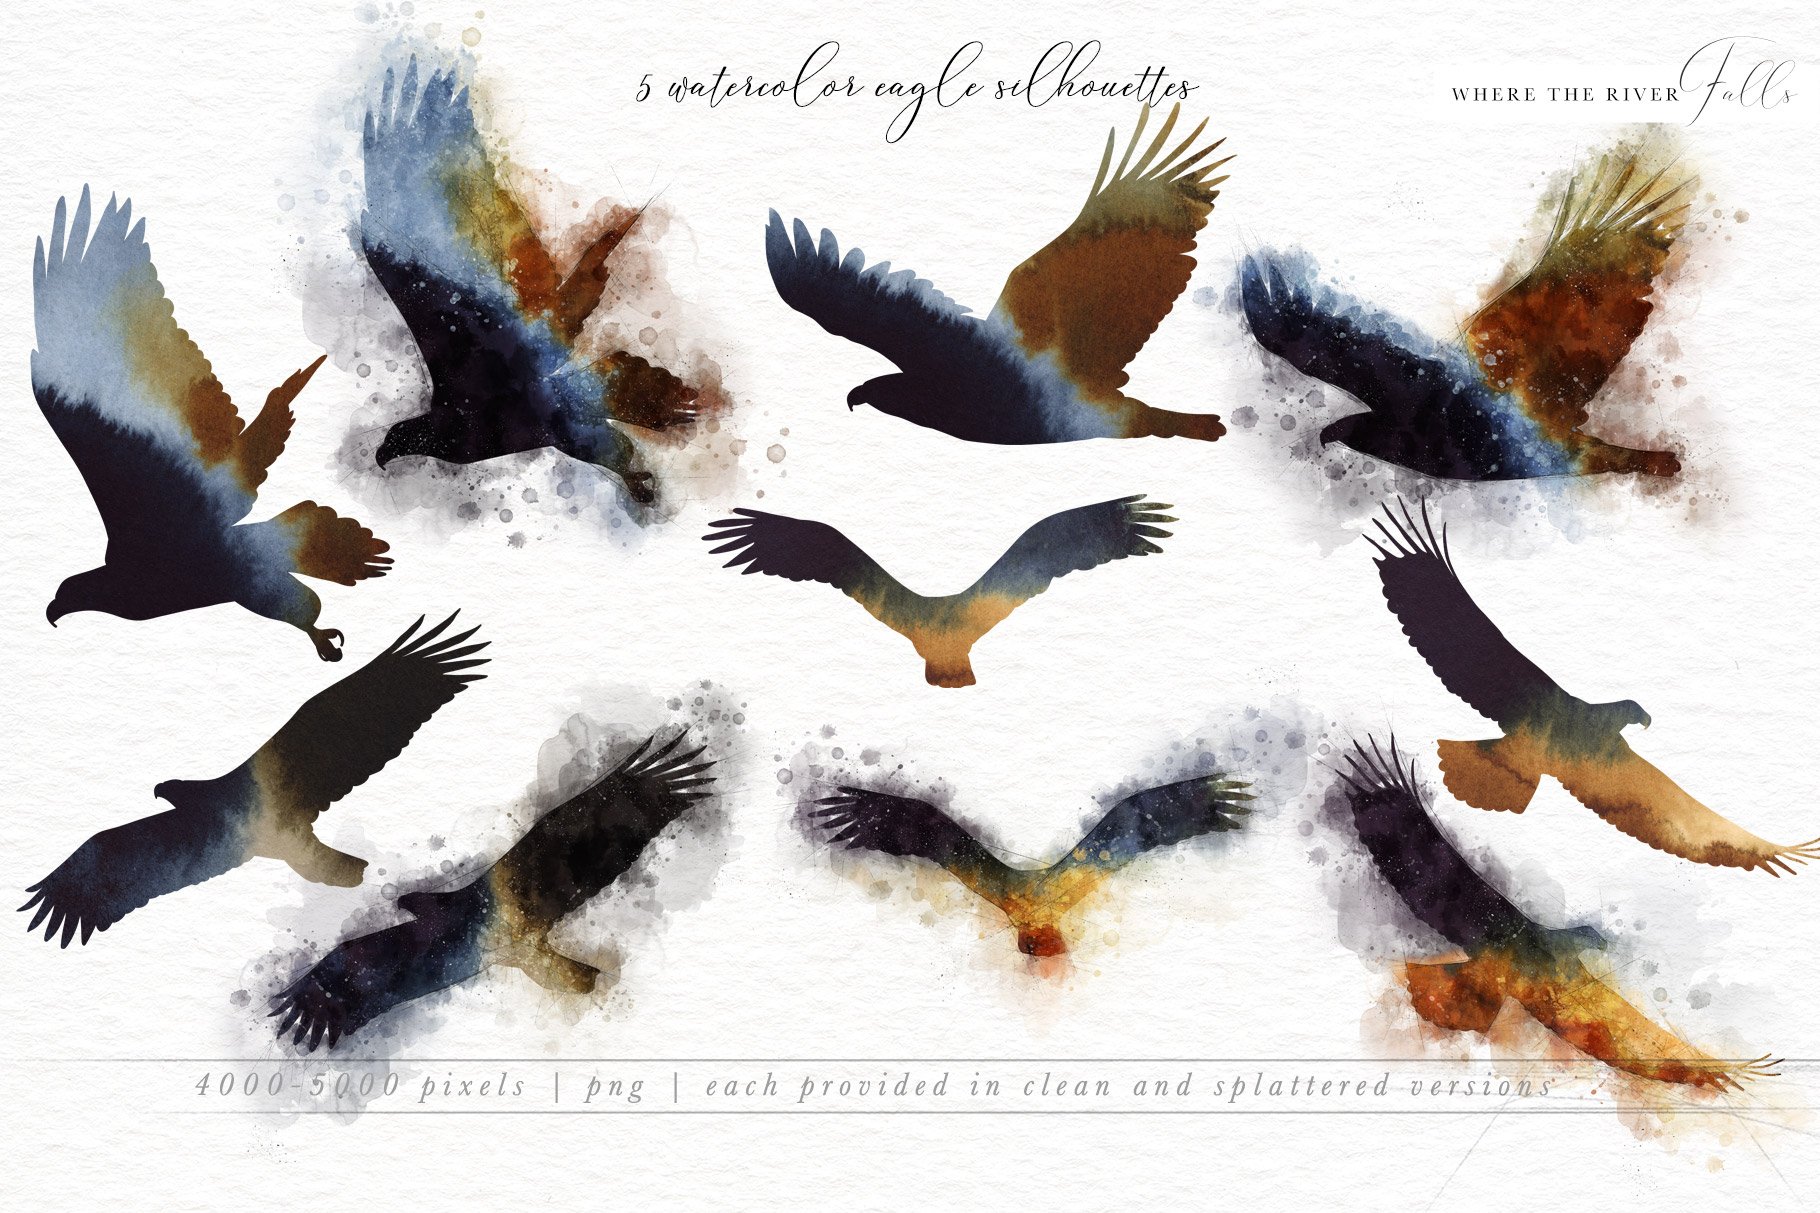 Eagle silhouettes in a watercolor.